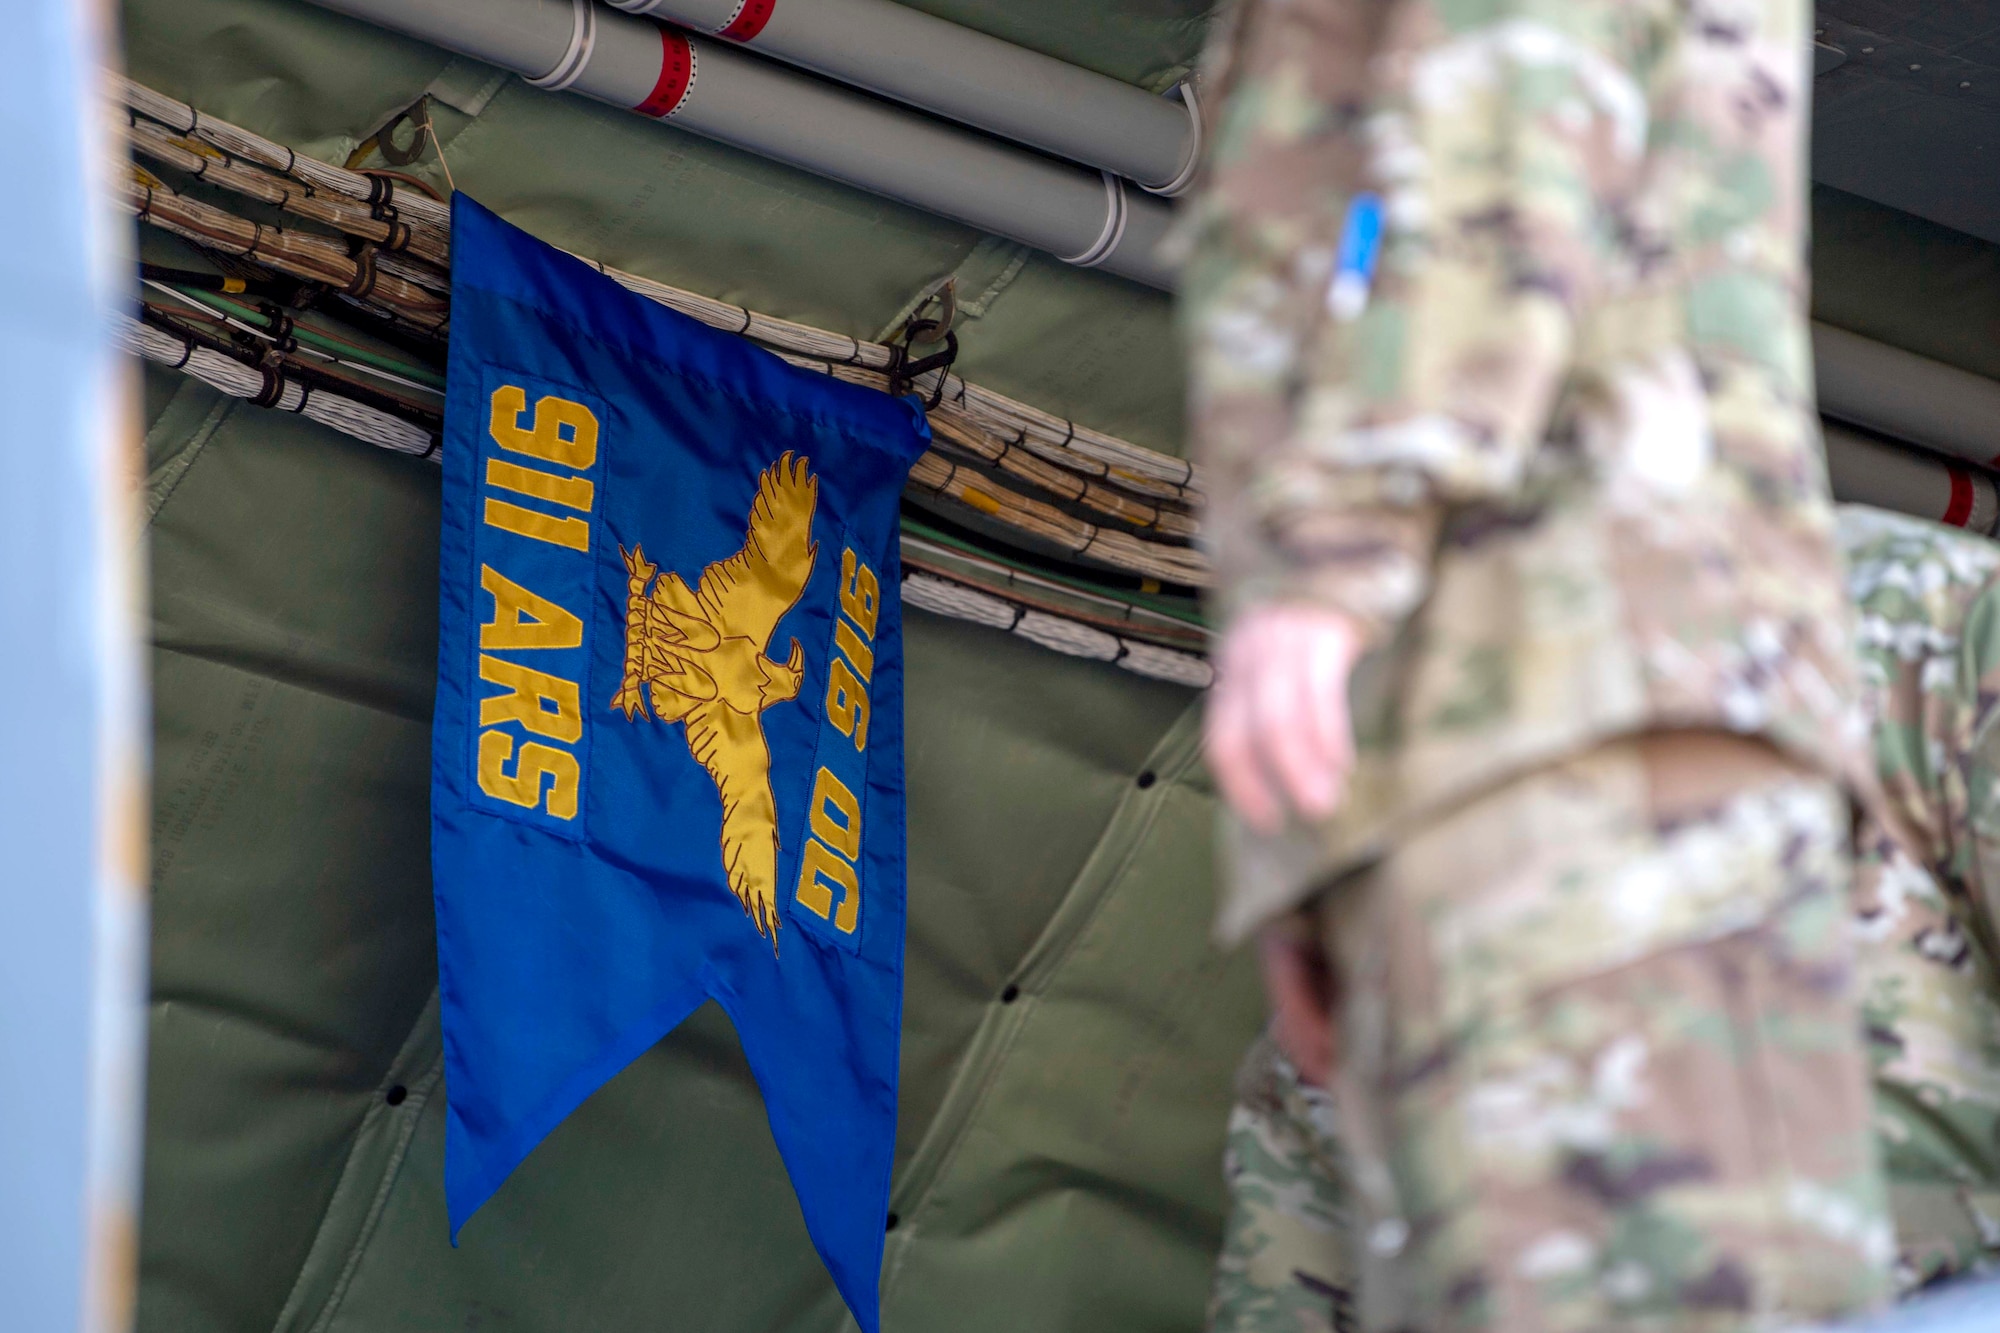 The 911th Air Refueling Squadron’s pennant hangs from the inside the aircraft as the cargo hatch is opened upon the aircraft being parked on the flightline Stratotanker on the flightline on Seymour Johnson Air Force Base, North Carolina, Dec. 16, 2019. The 911 ARS completed their final mission on a KC-135 Stratotanker. (U.S. Air Force photo by Staff Sgt. Mary McKnight)